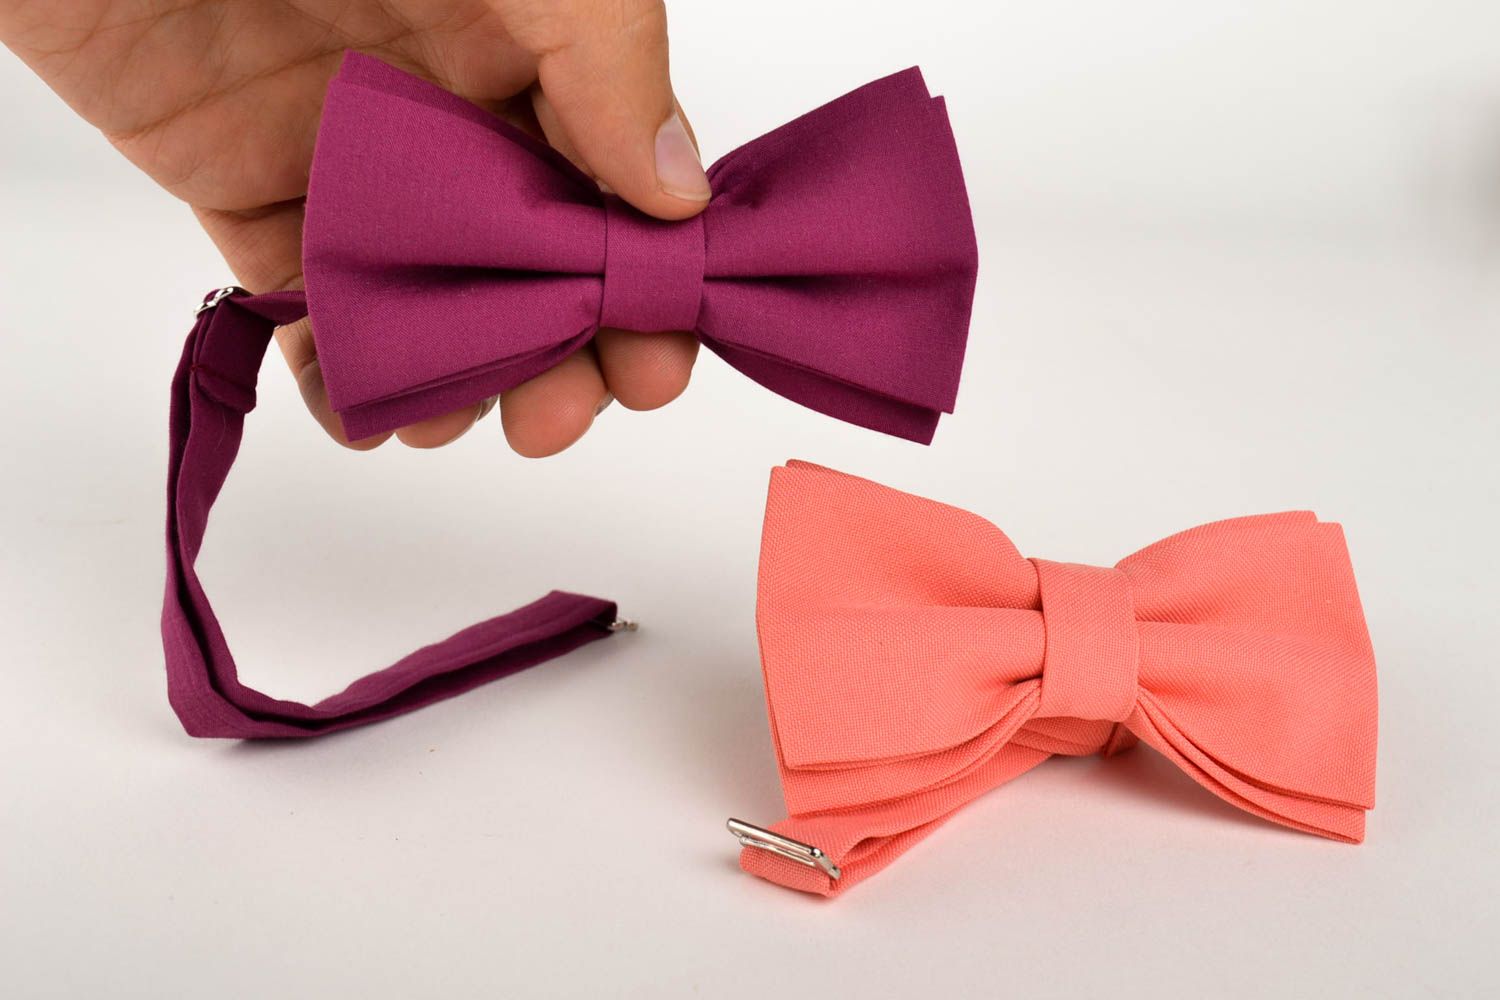 Handmade textile bow tie fabric bow tie accessories for friend present for men photo 5